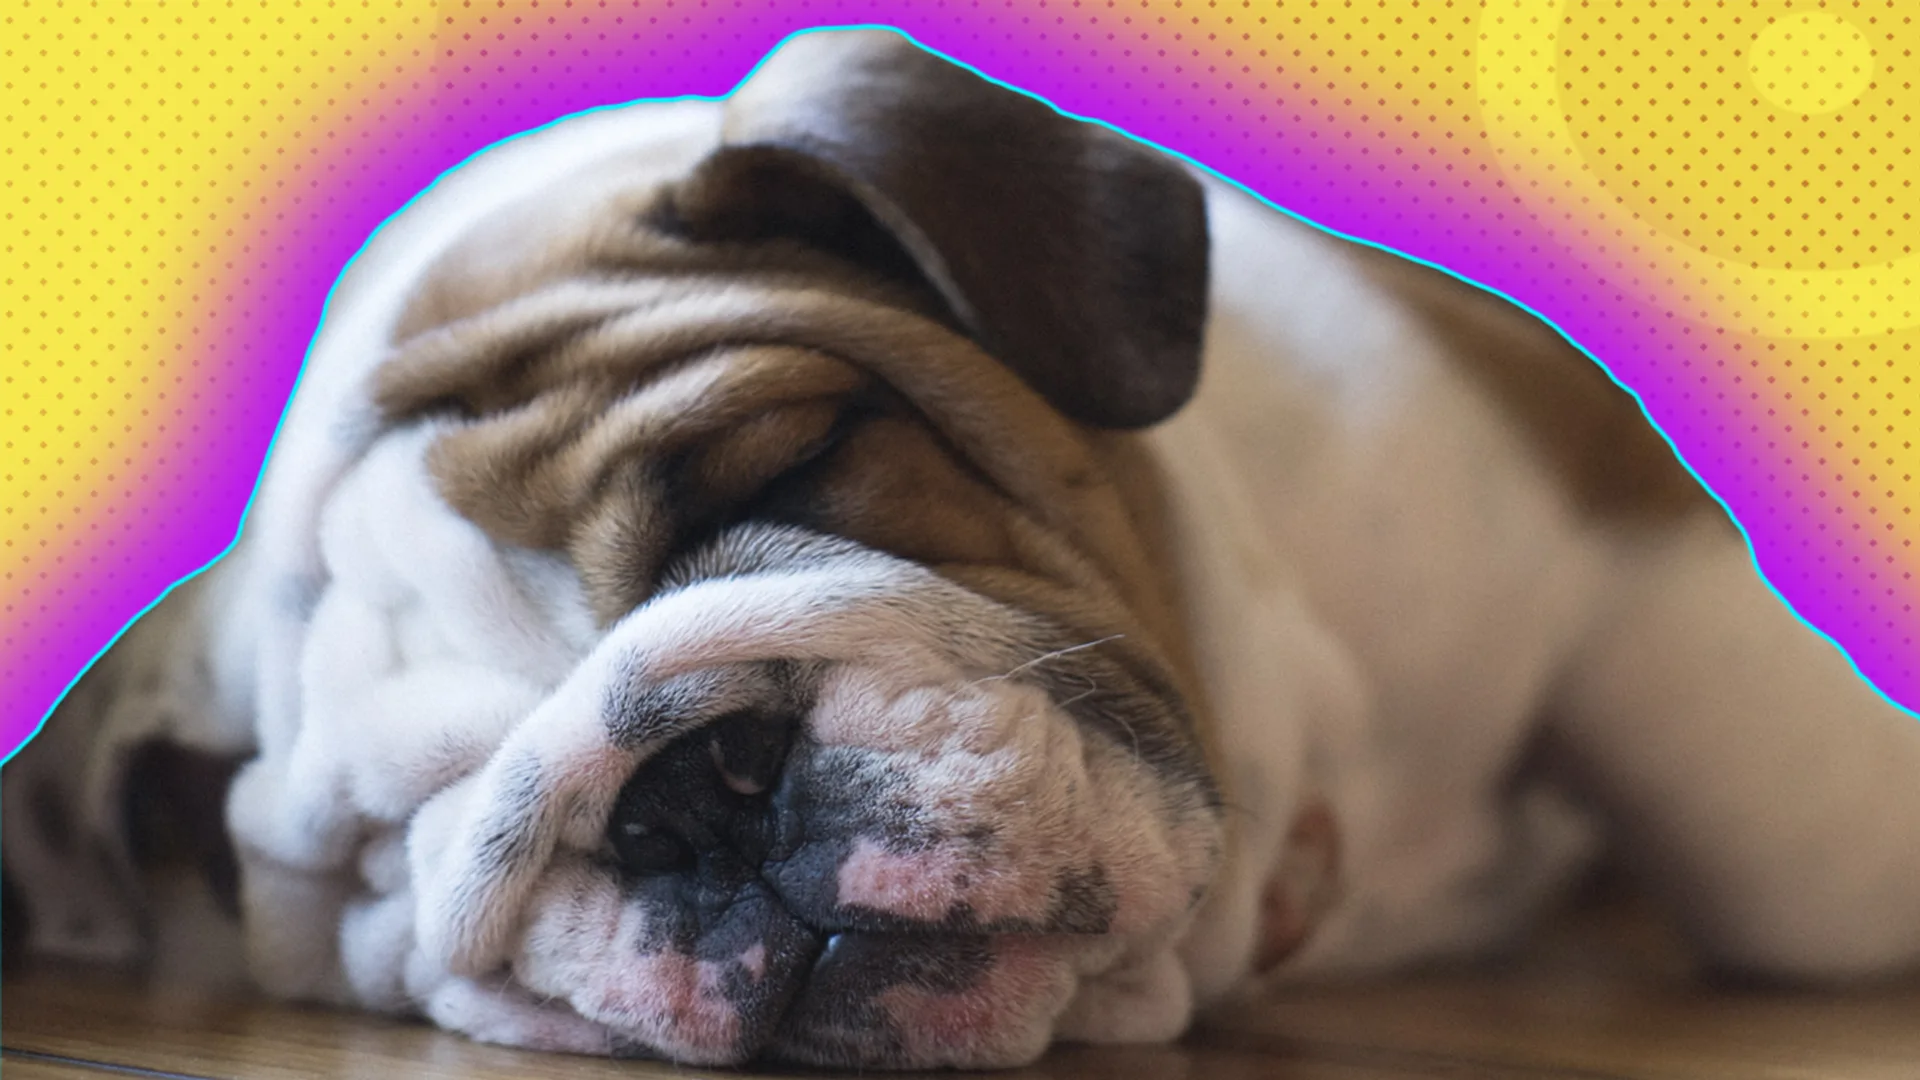 Sleeping dog with pink glow on a yellow background